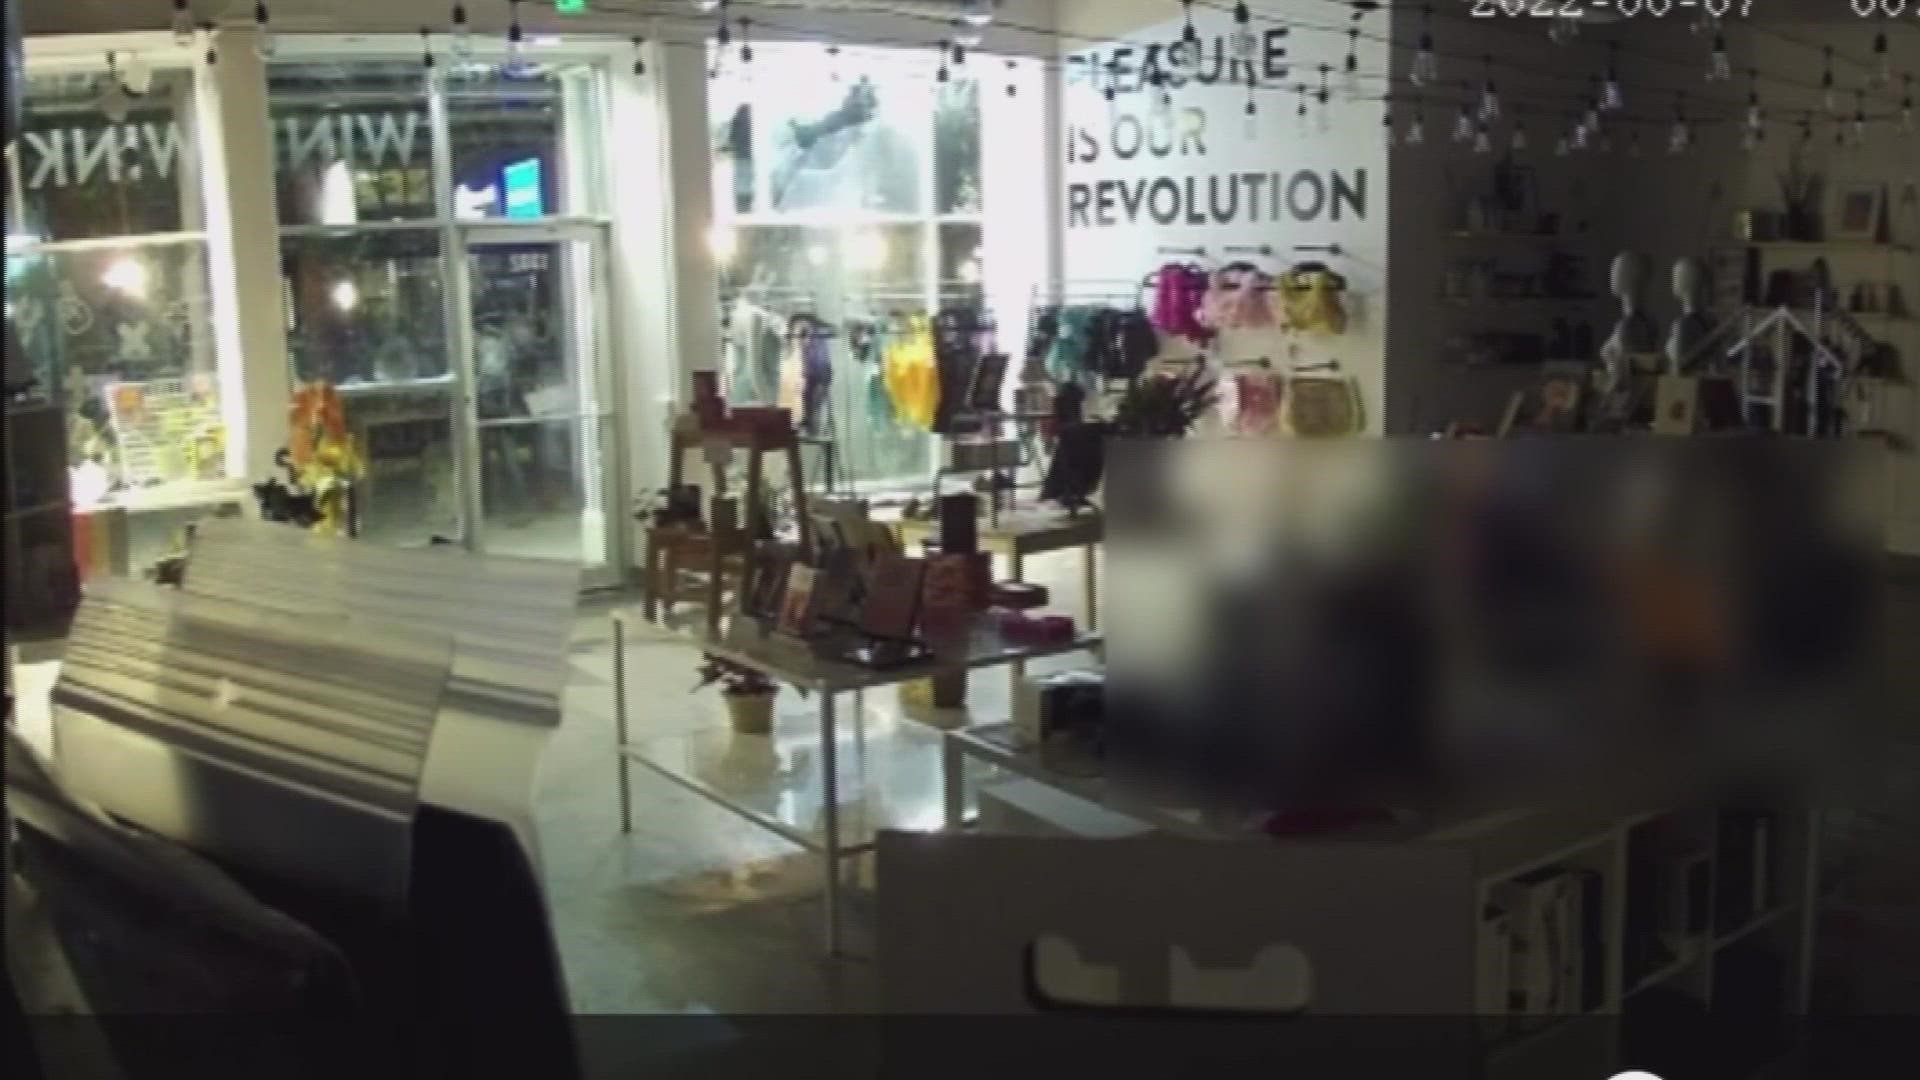 Wink Wink Boutique has been targeted by vandalism and harassment in recent weeks.